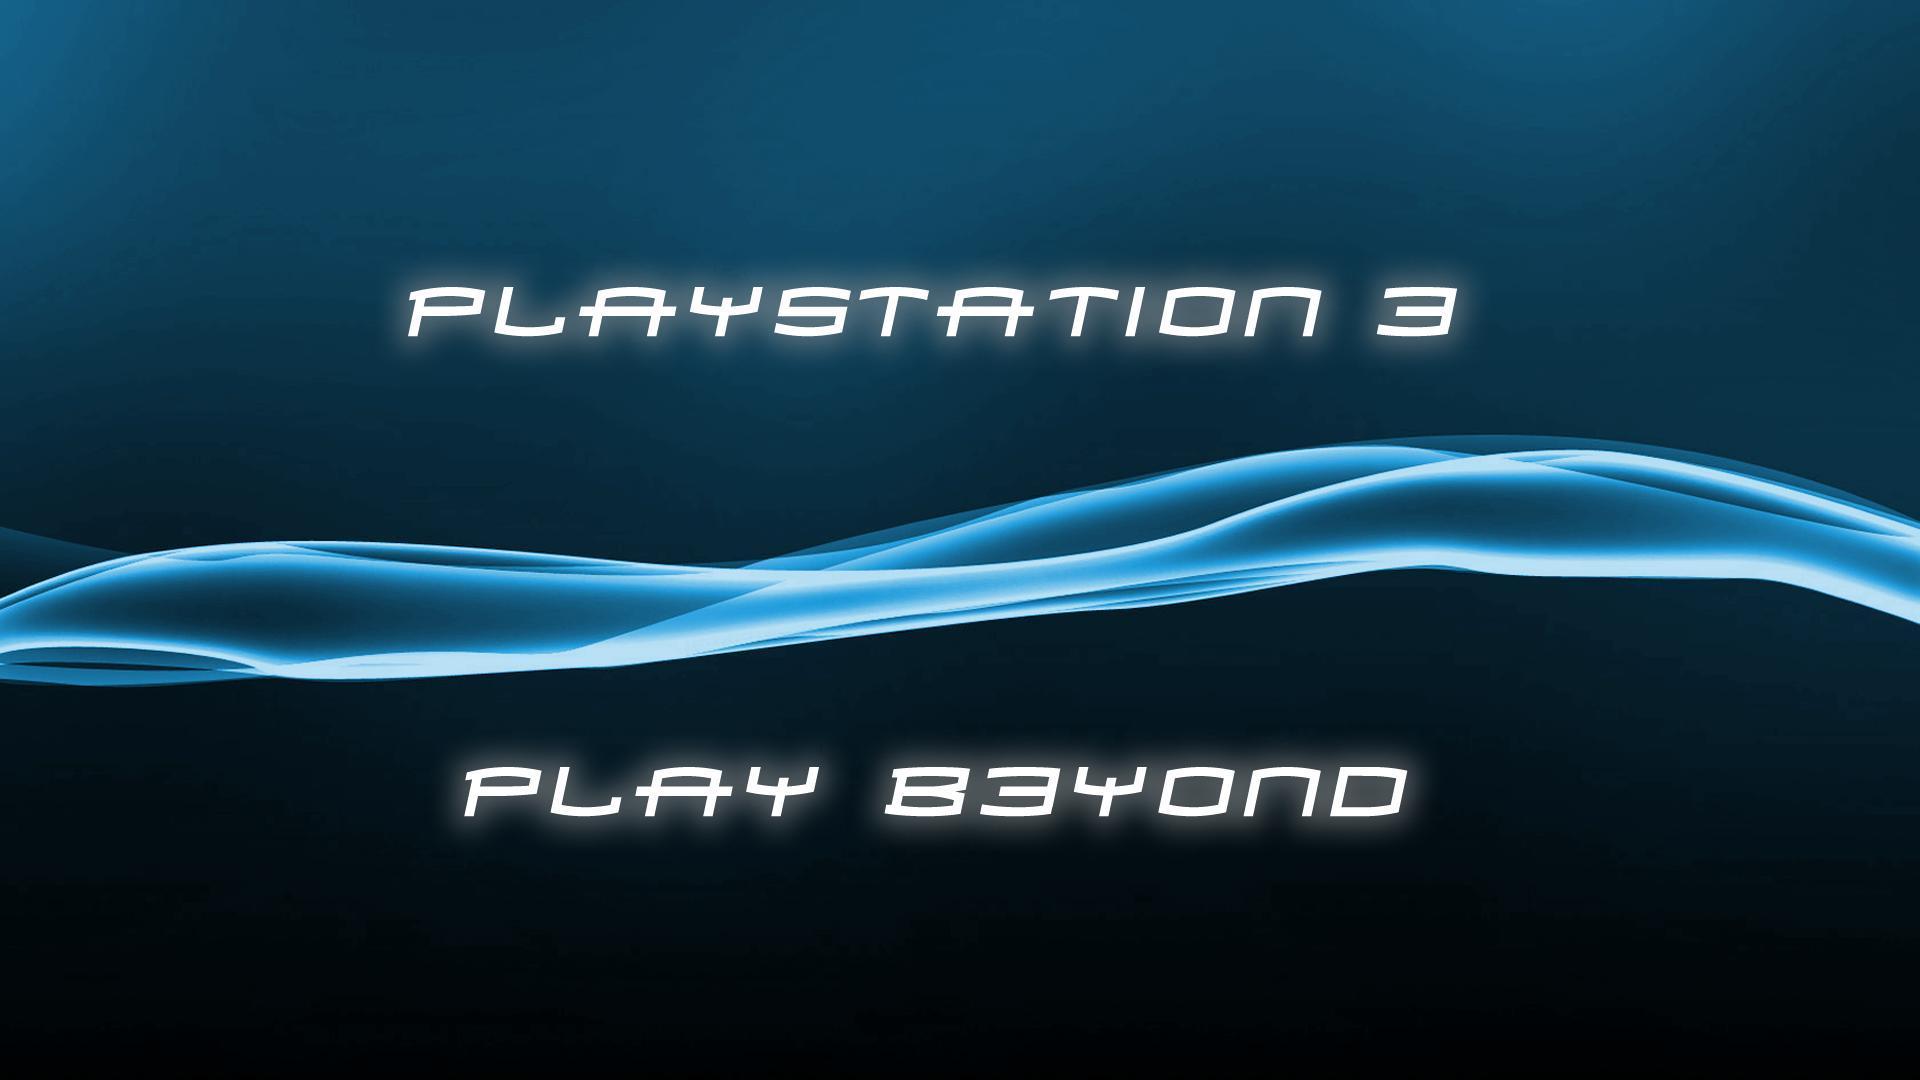 PlayStation 3 Wallpapers - Wallpaper Cave